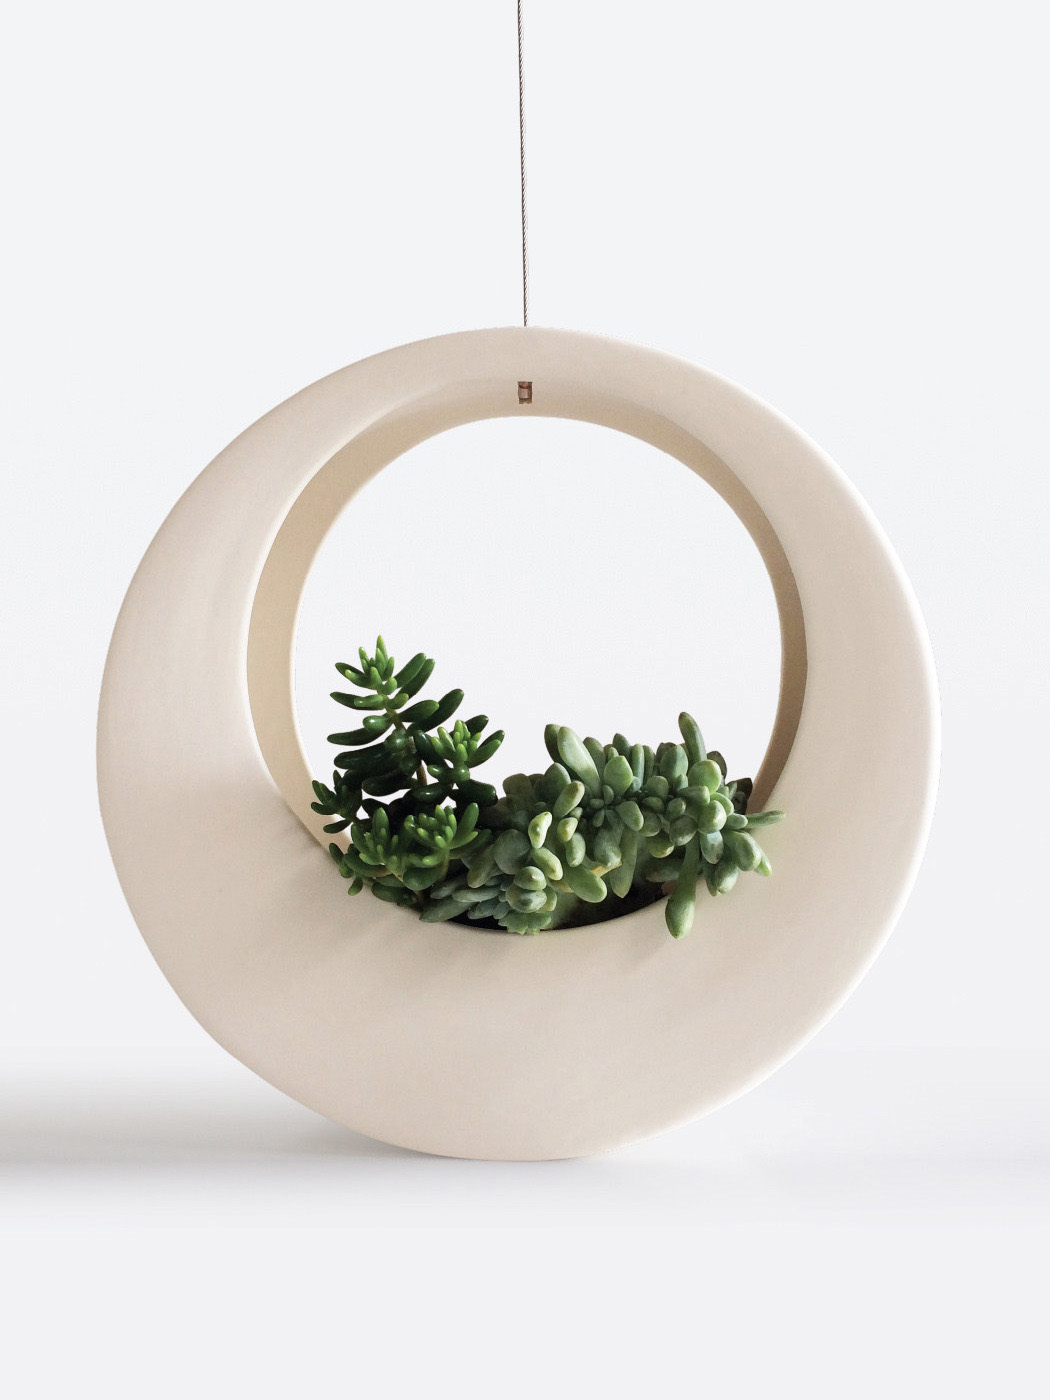 Hanging Planters for the Home